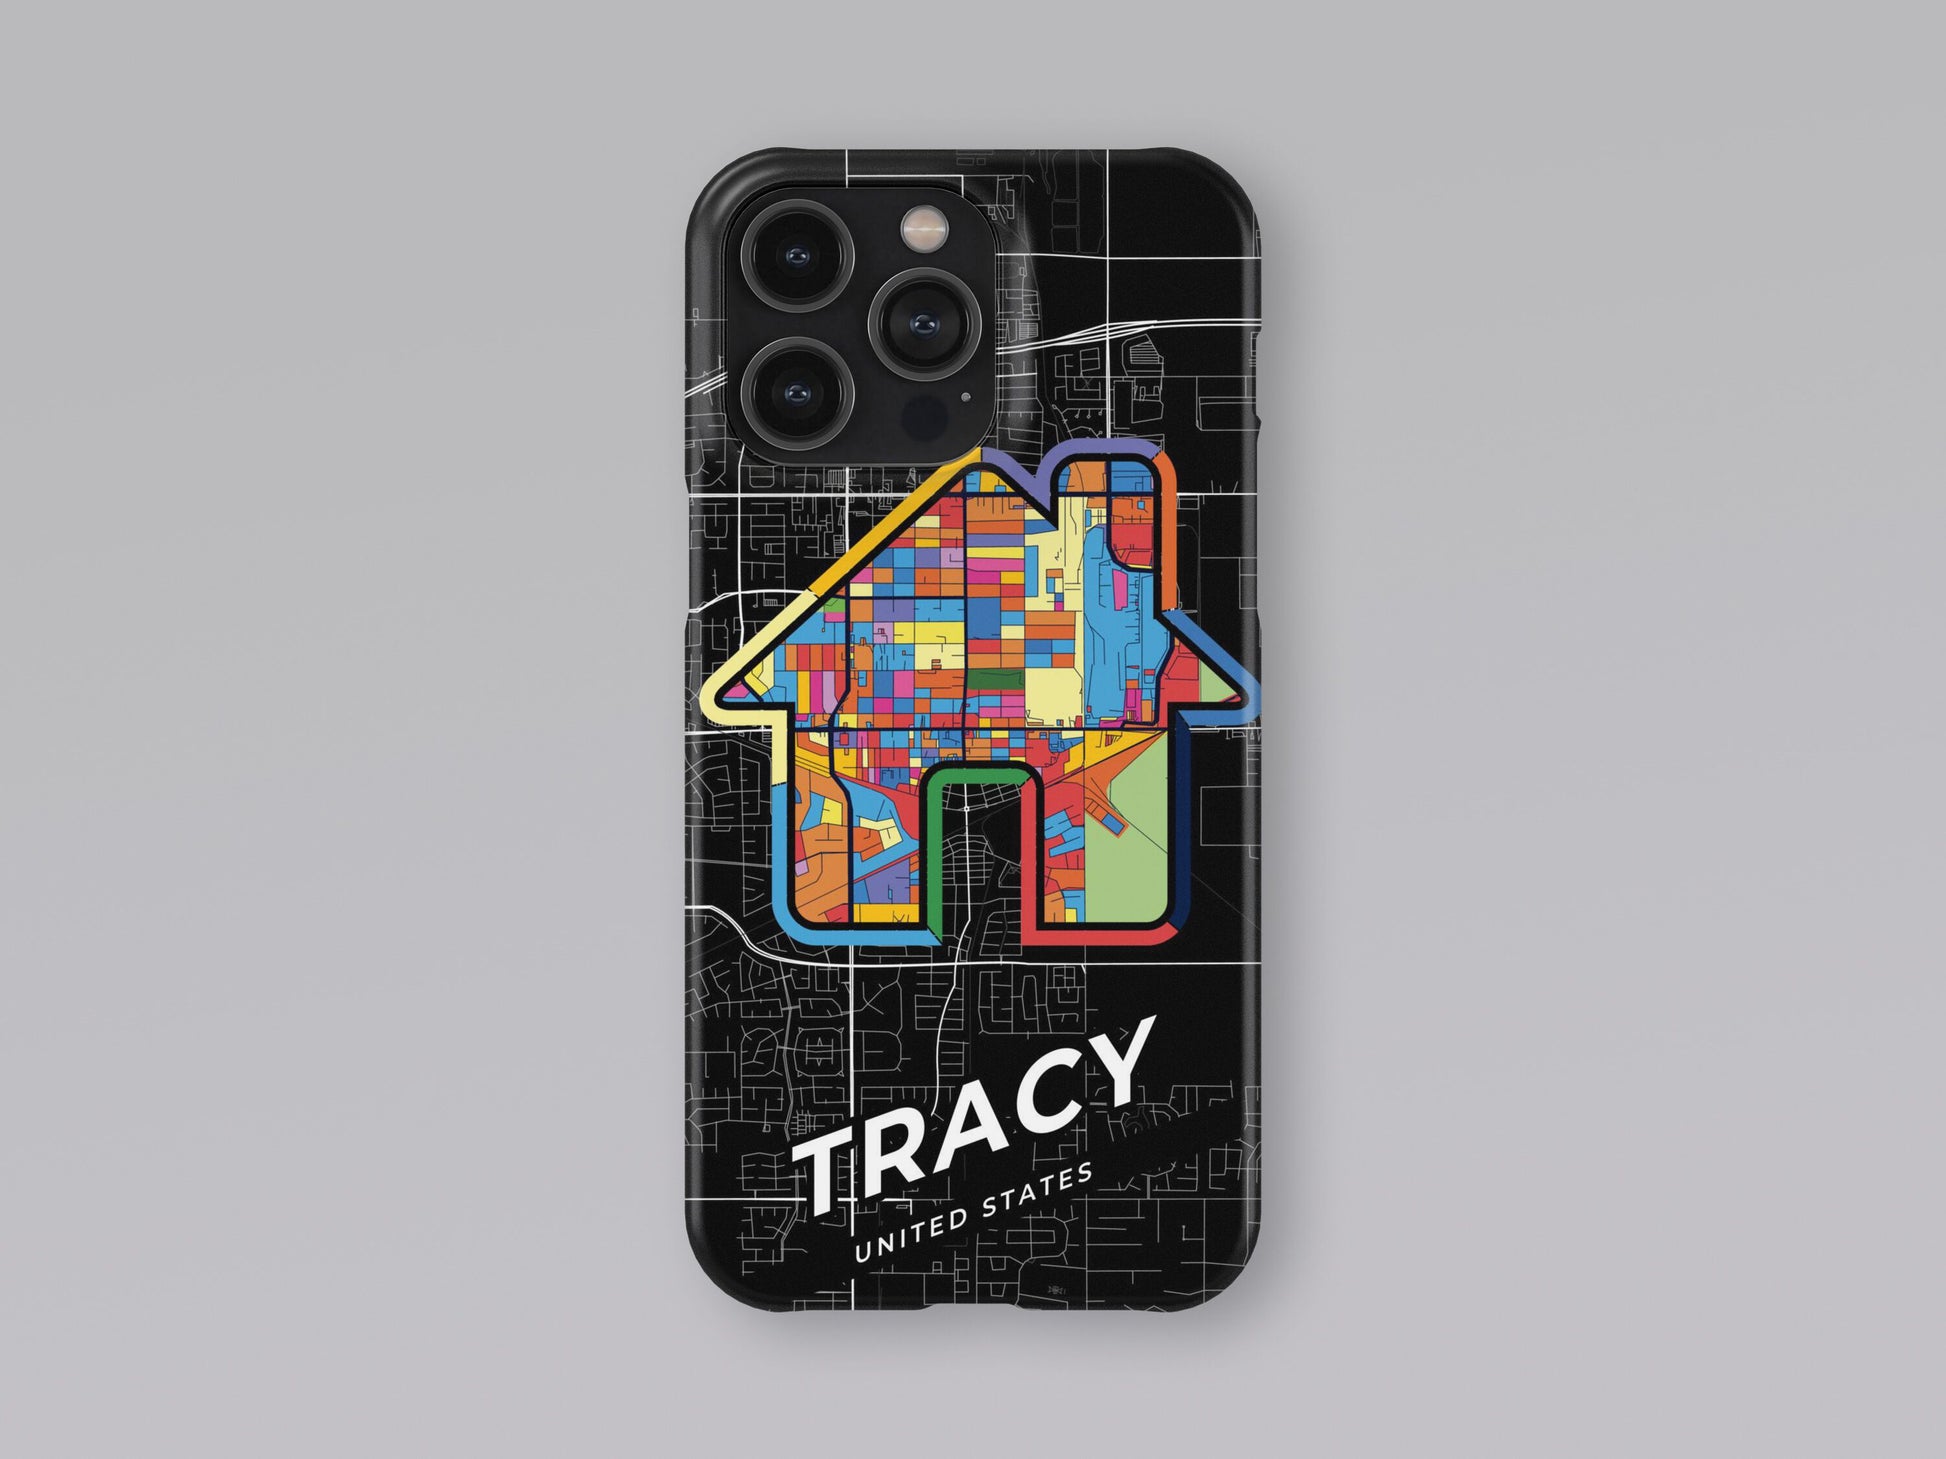 Tracy California slim phone case with colorful icon 3